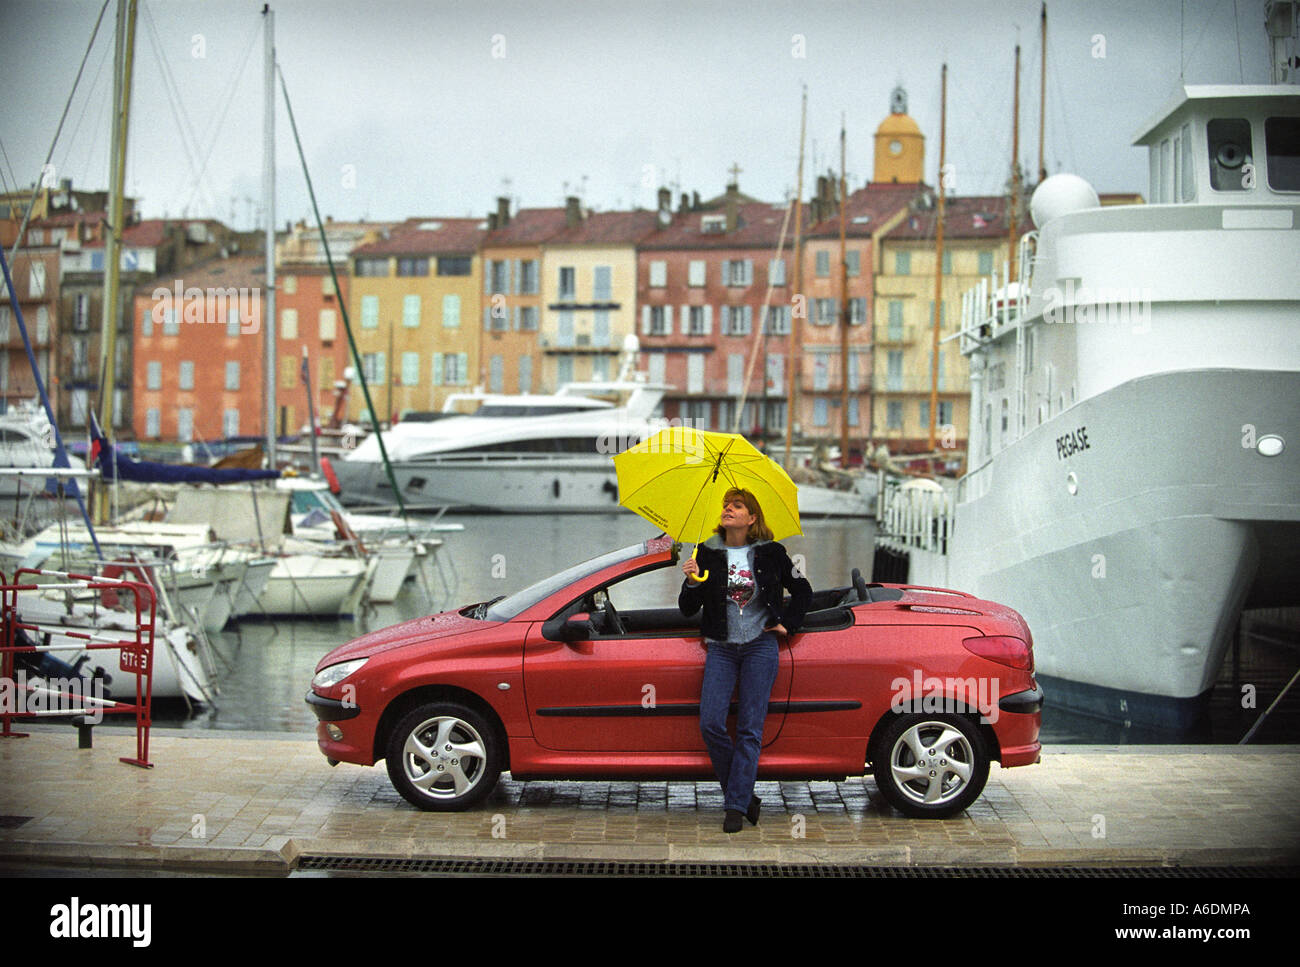 A FEMALE WITH A YELLOW UMBRELLA AND A PEUGEOT 206 COUPE CONVERTIBLE IN ST TROPEZ HARBOUR Stock Photo